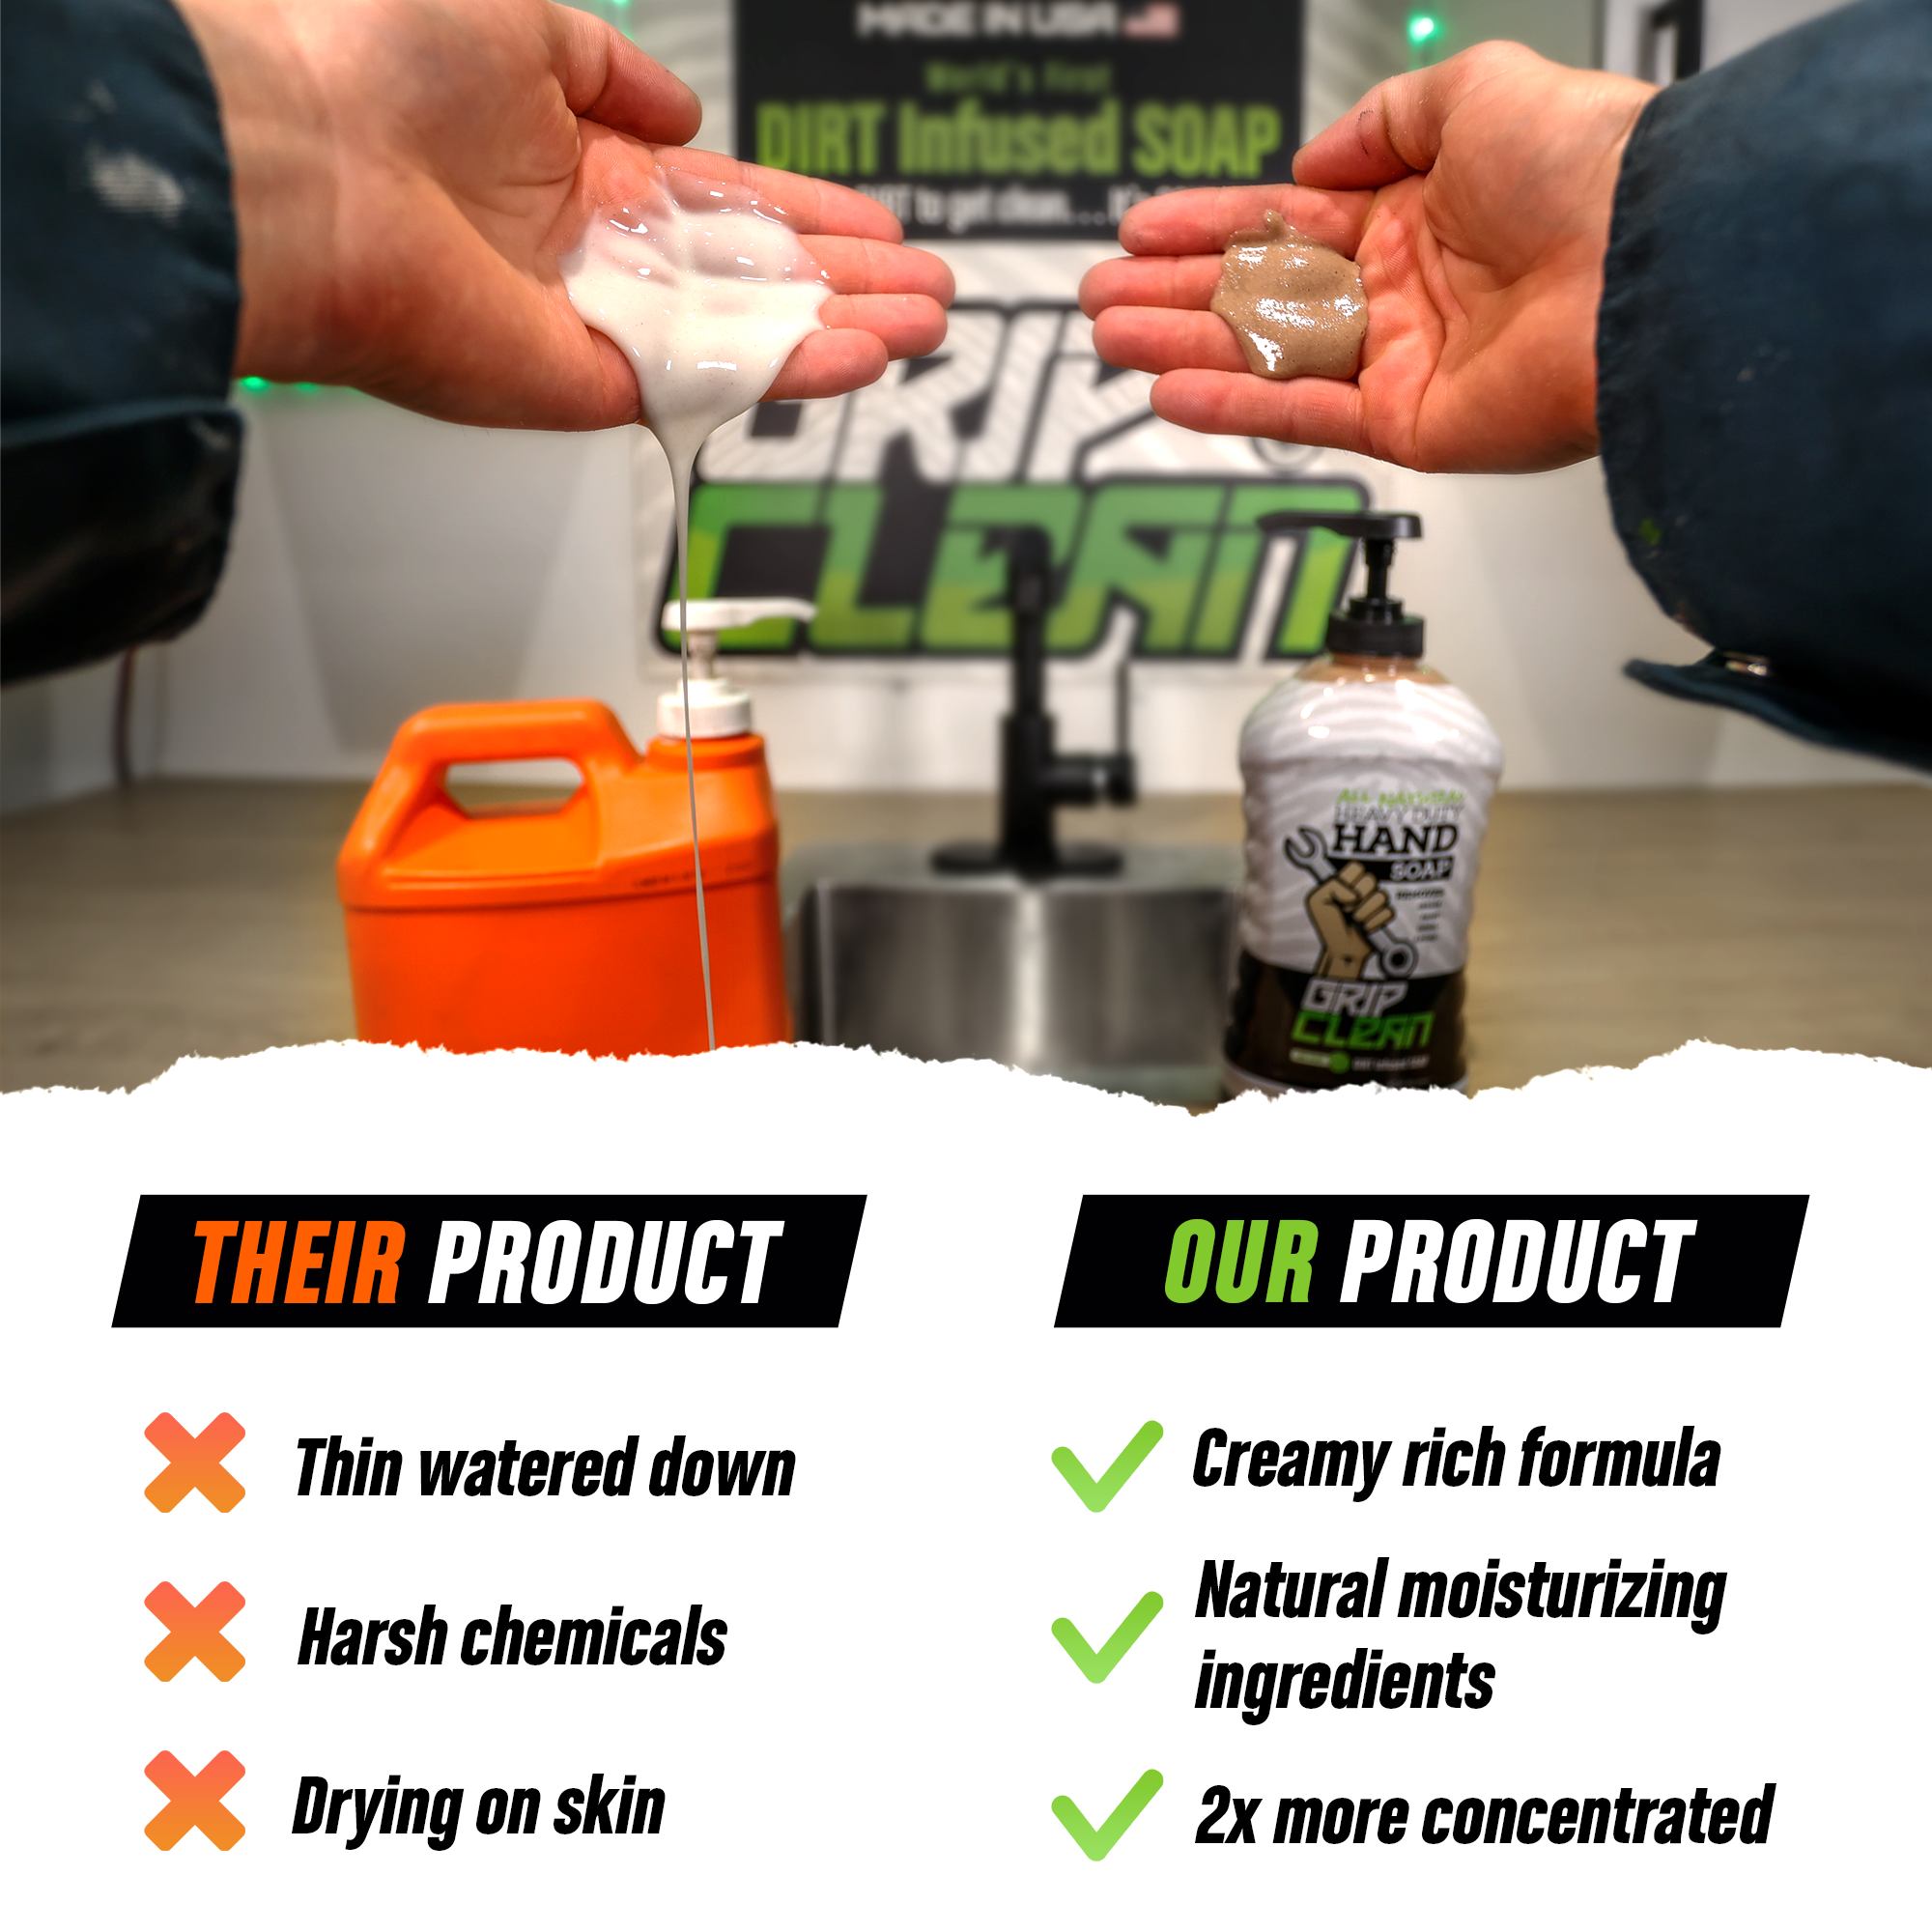 Grip Clean - Degreaser Hand Cleaner for Auto Mechanics - Dirt-Infused  Liquid Hand Soap Absorbs Grease, Oil, & Odors. Natural Heavy Duty Pumice  Soap